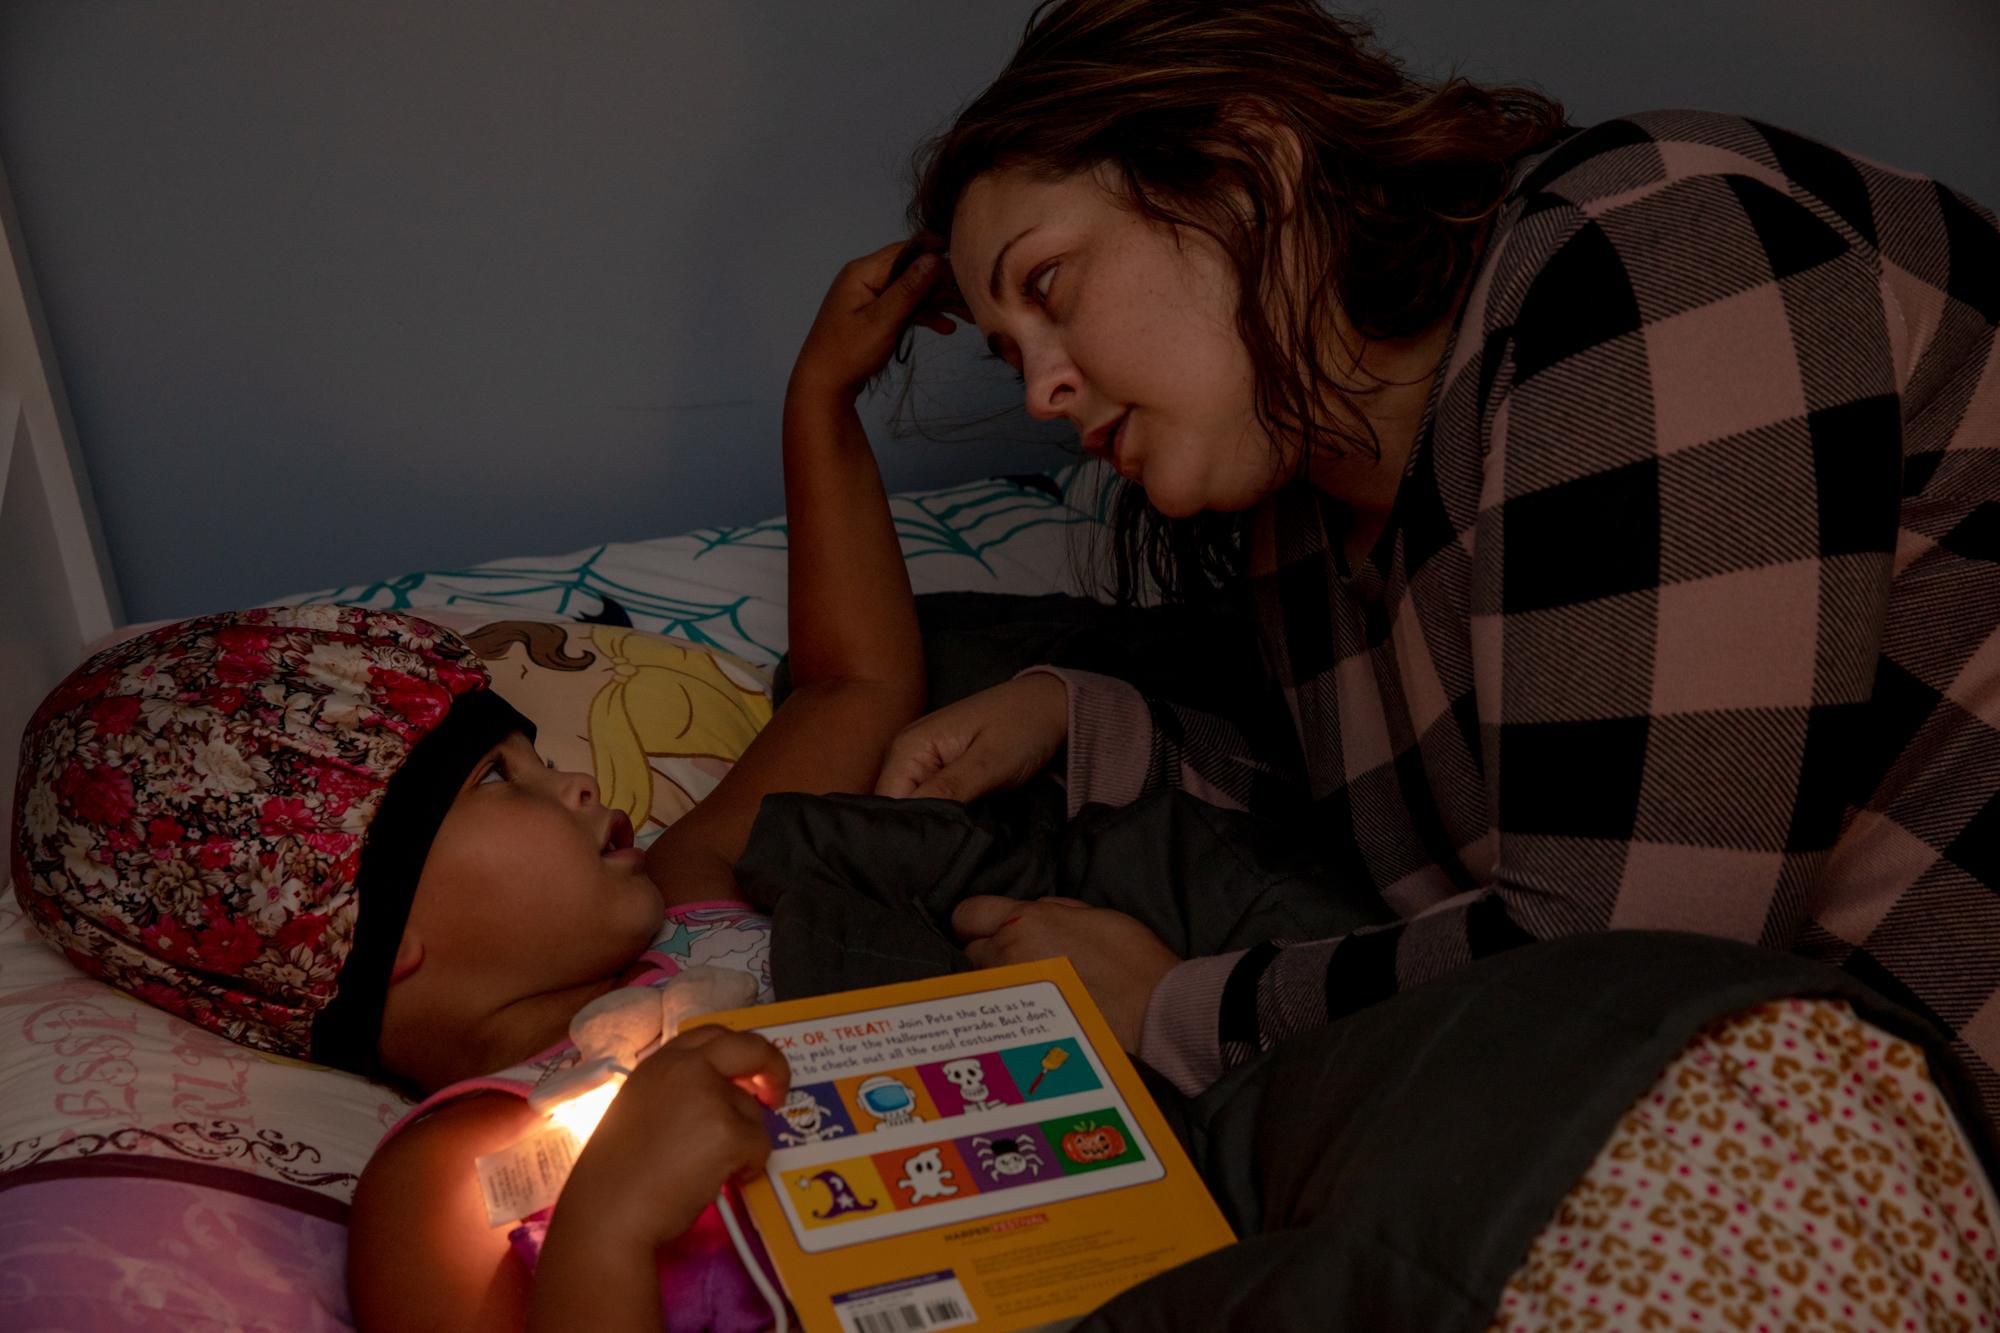 Lying in bed the night before her first in-person class at kindergarten, Juliet told Tracey that she&rsquo;s scared of going to kindergarten. Tracey listened and nodded. &ldquo;You were out of school for a long time,&rdquo; she said. The family of three had stayed home for nearly six months.